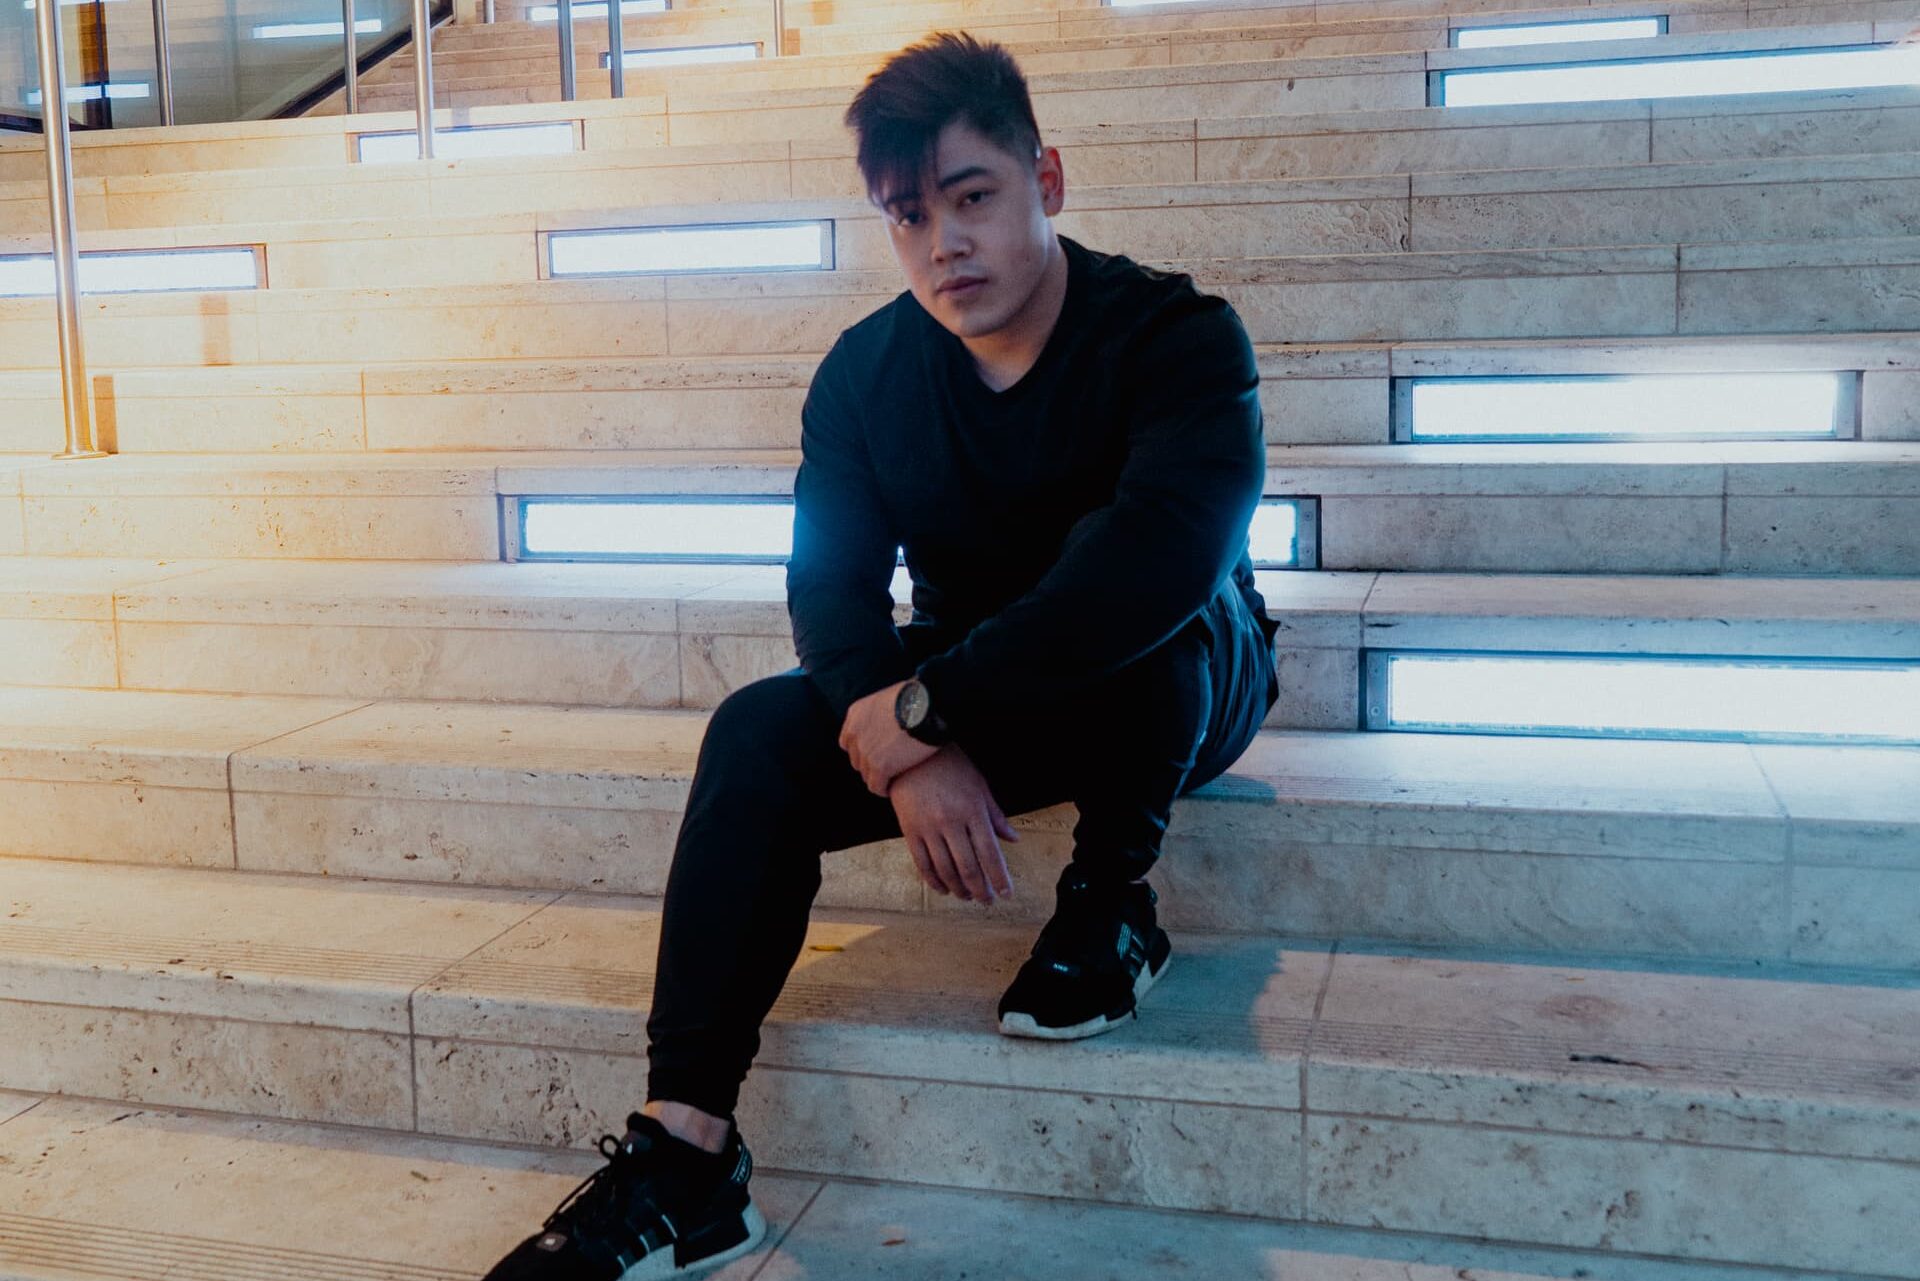 From struggles to success: Hoang shares how music changed his life